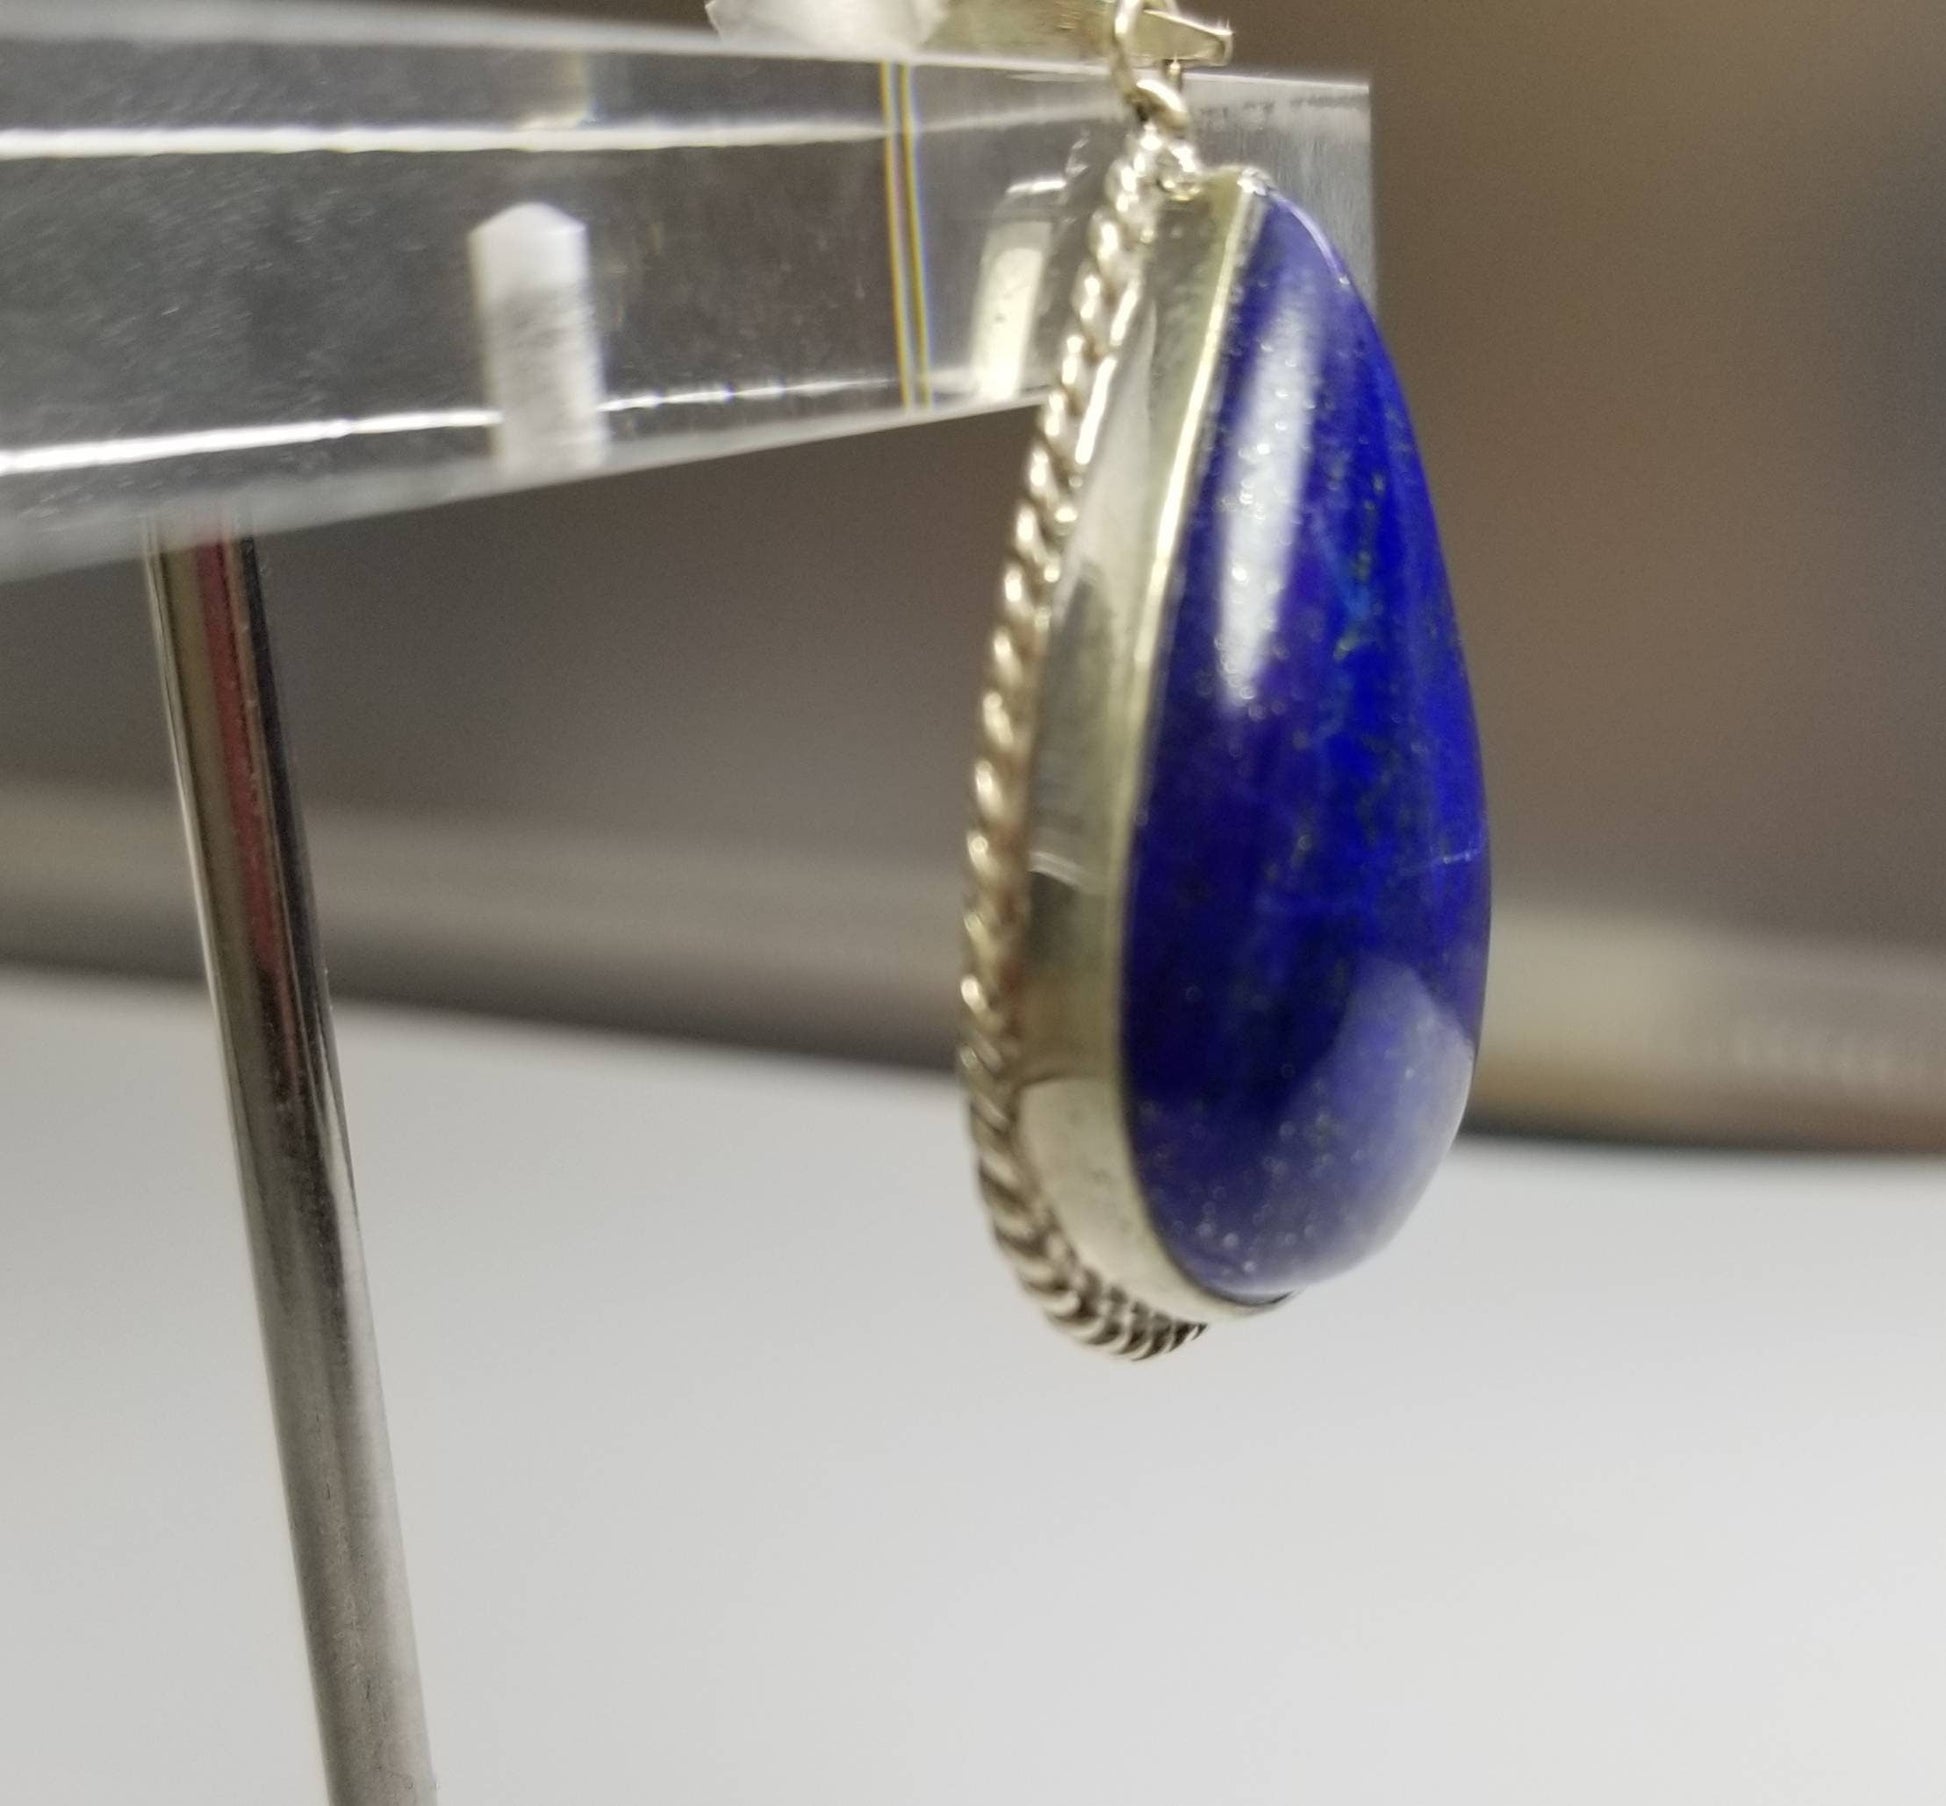 ARSAA GEMS AND MINERALSNatural good quality locket lapis lazuli silver pendant - Premium  from ARSAA GEMS AND MINERALS - Just $15.00! Shop now at ARSAA GEMS AND MINERALS